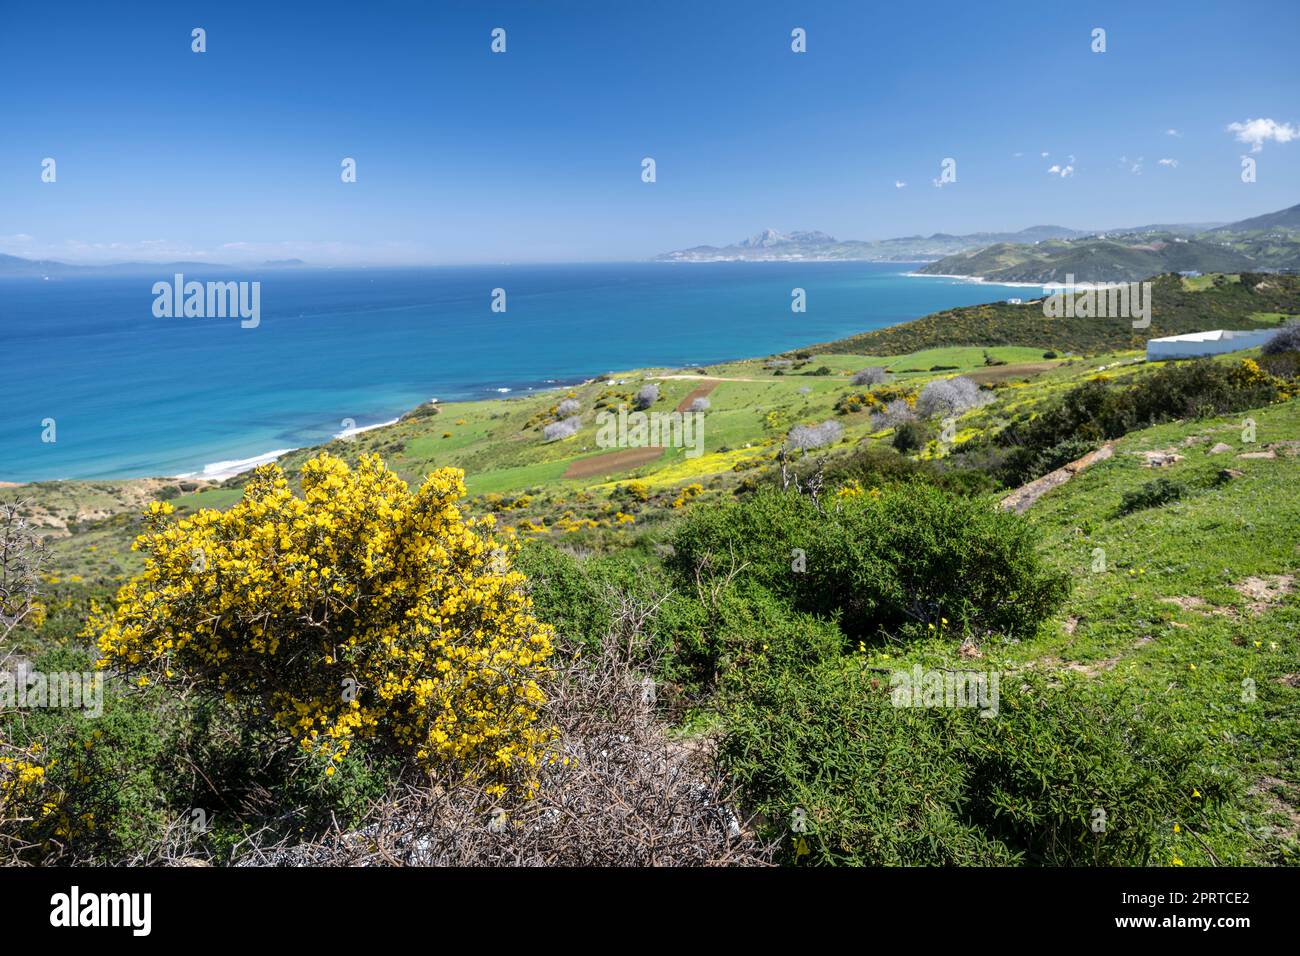 Landscape of the north coast of Morocco with views of the Strait of Gibraltar. Stock Photo